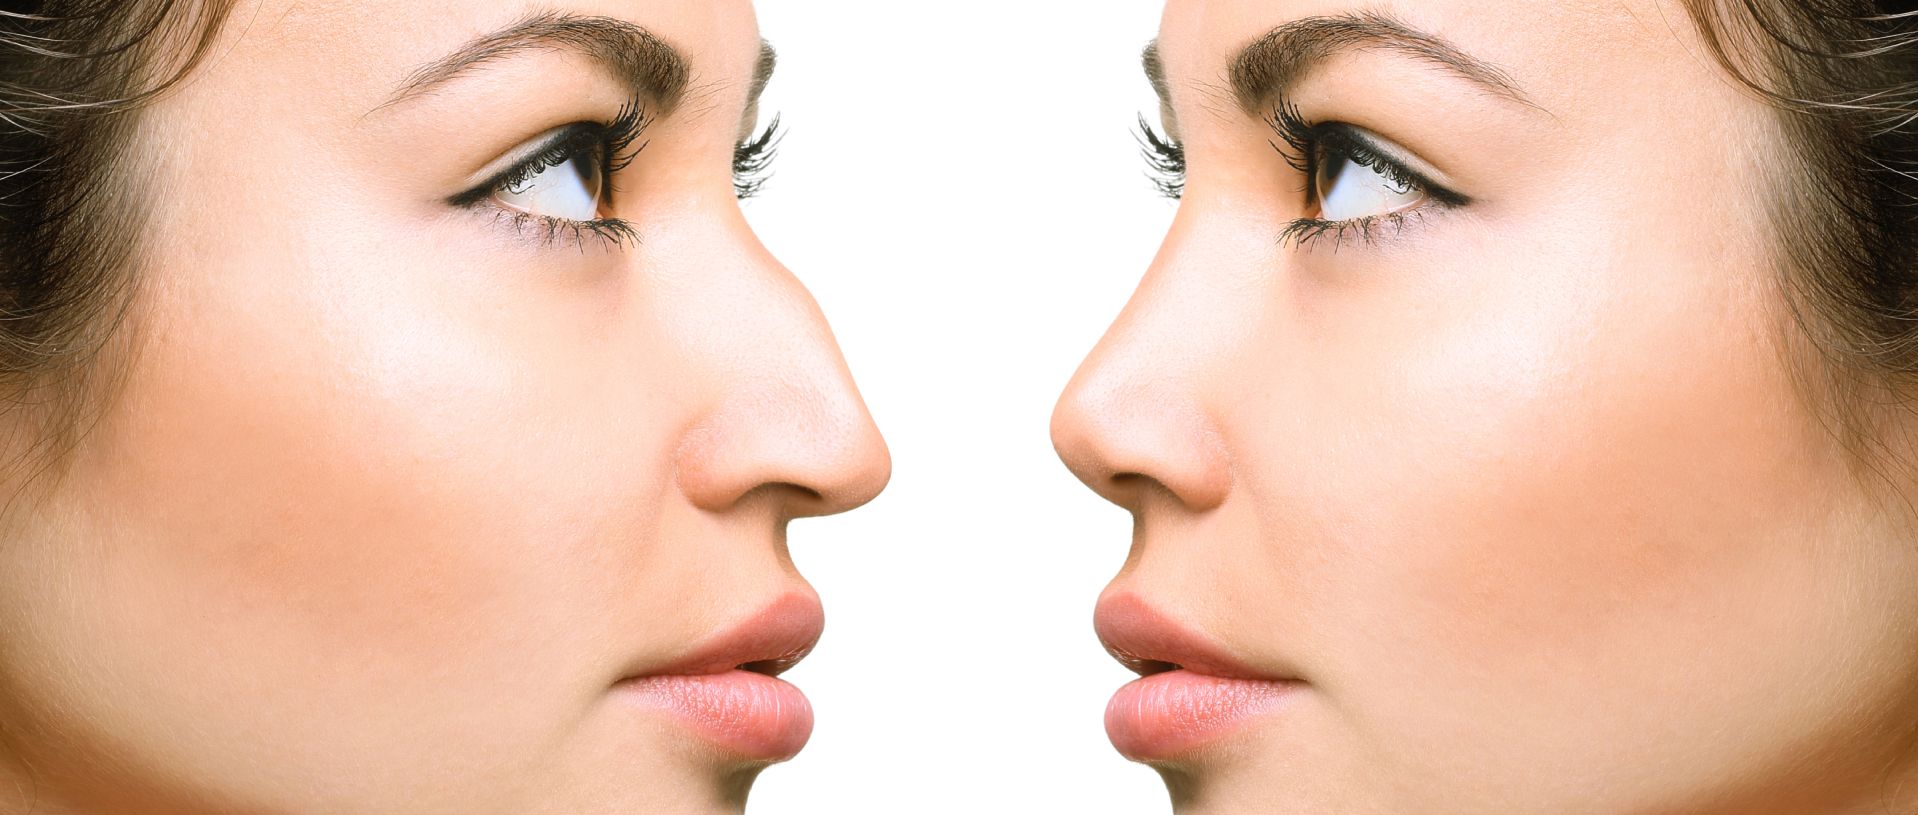 before and after rhinoplasty for Asians